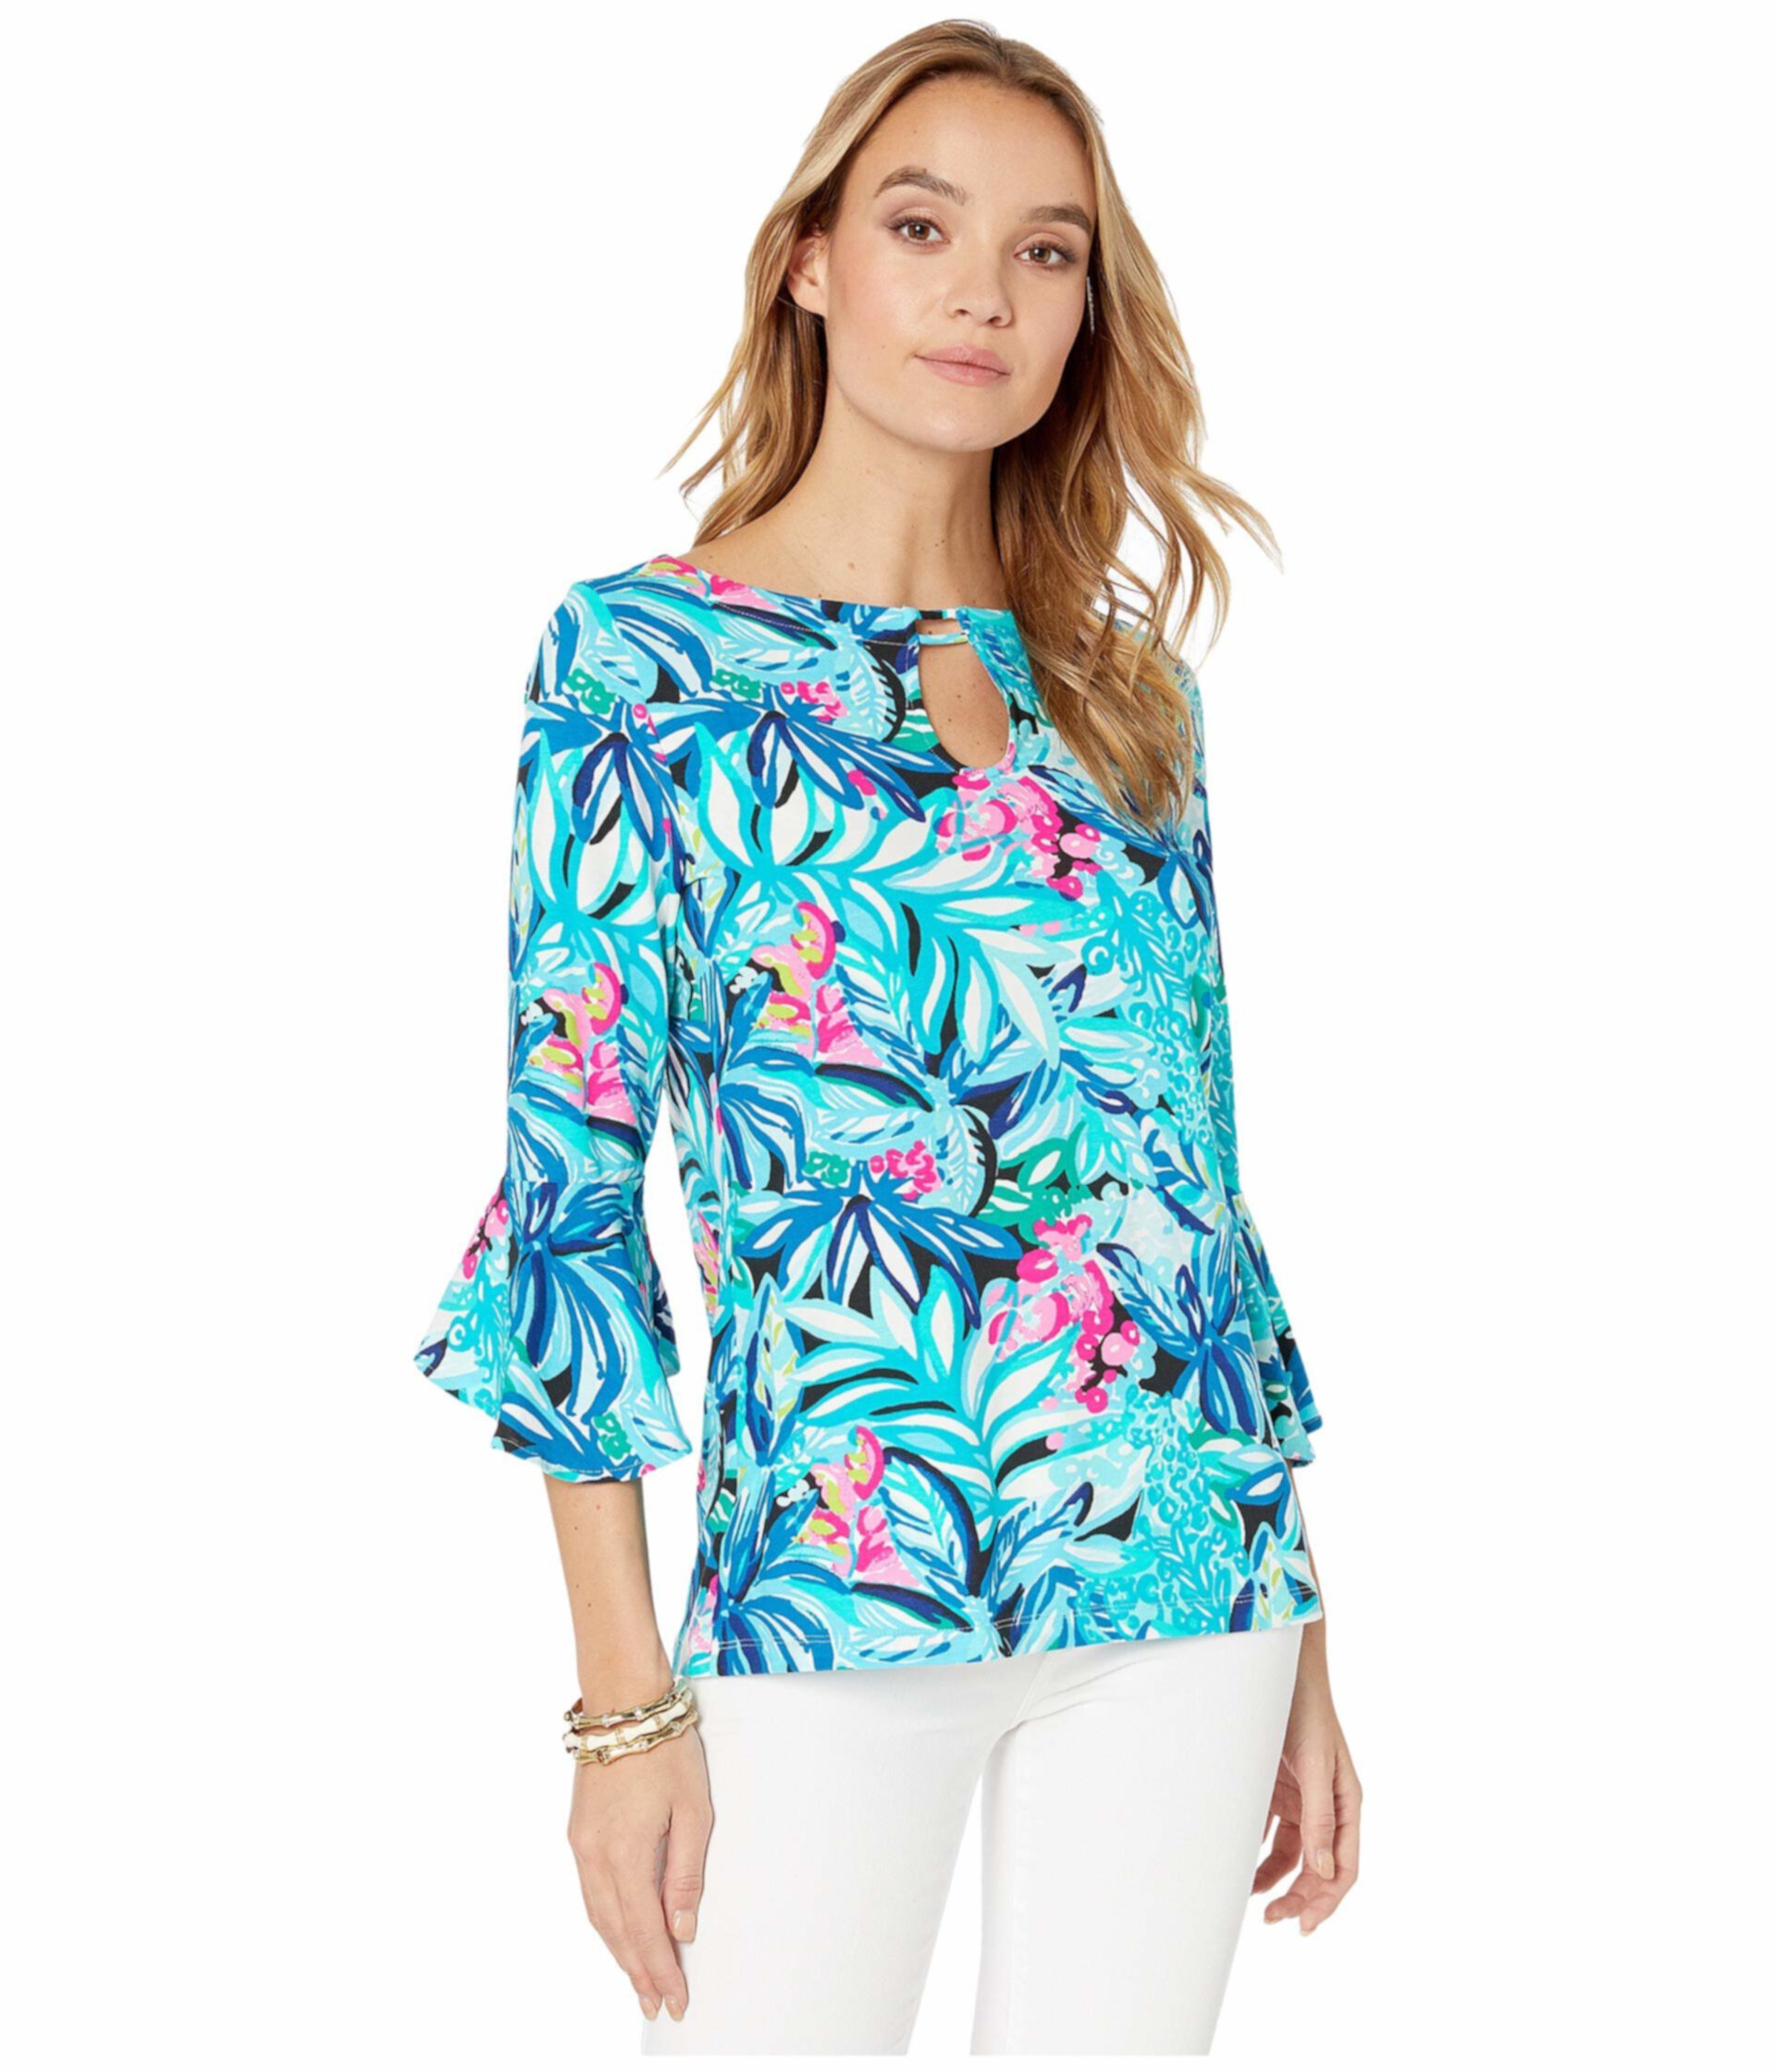 Fontaine Top Lilly Pulitzer